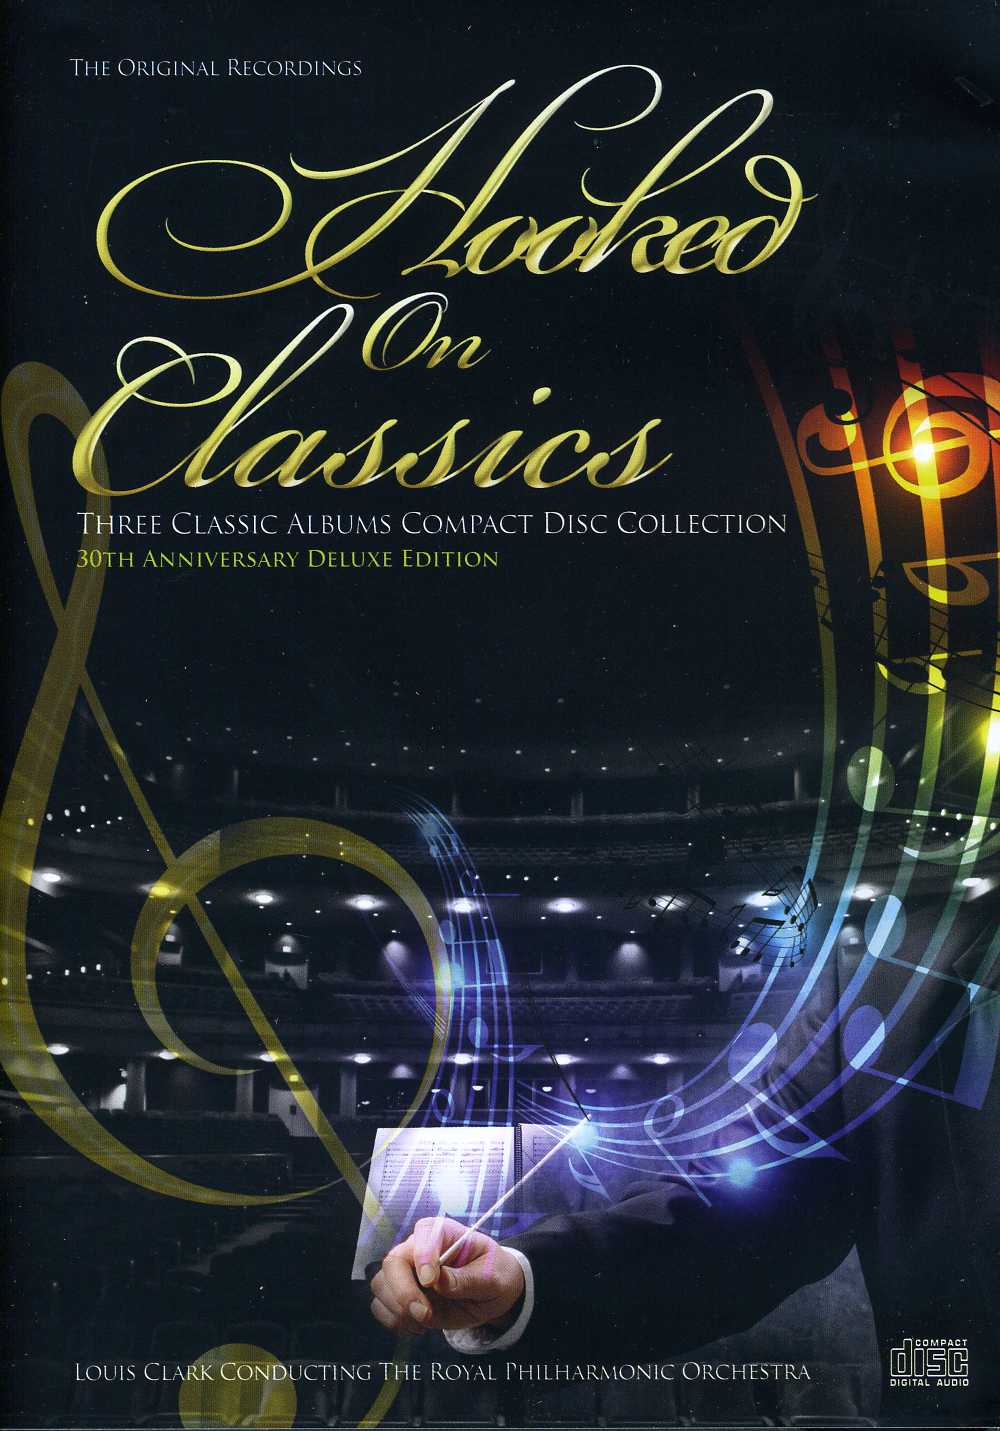 HOOKED ON CLASSICS THREE CLASSIC ALBUMS CD COLLECT